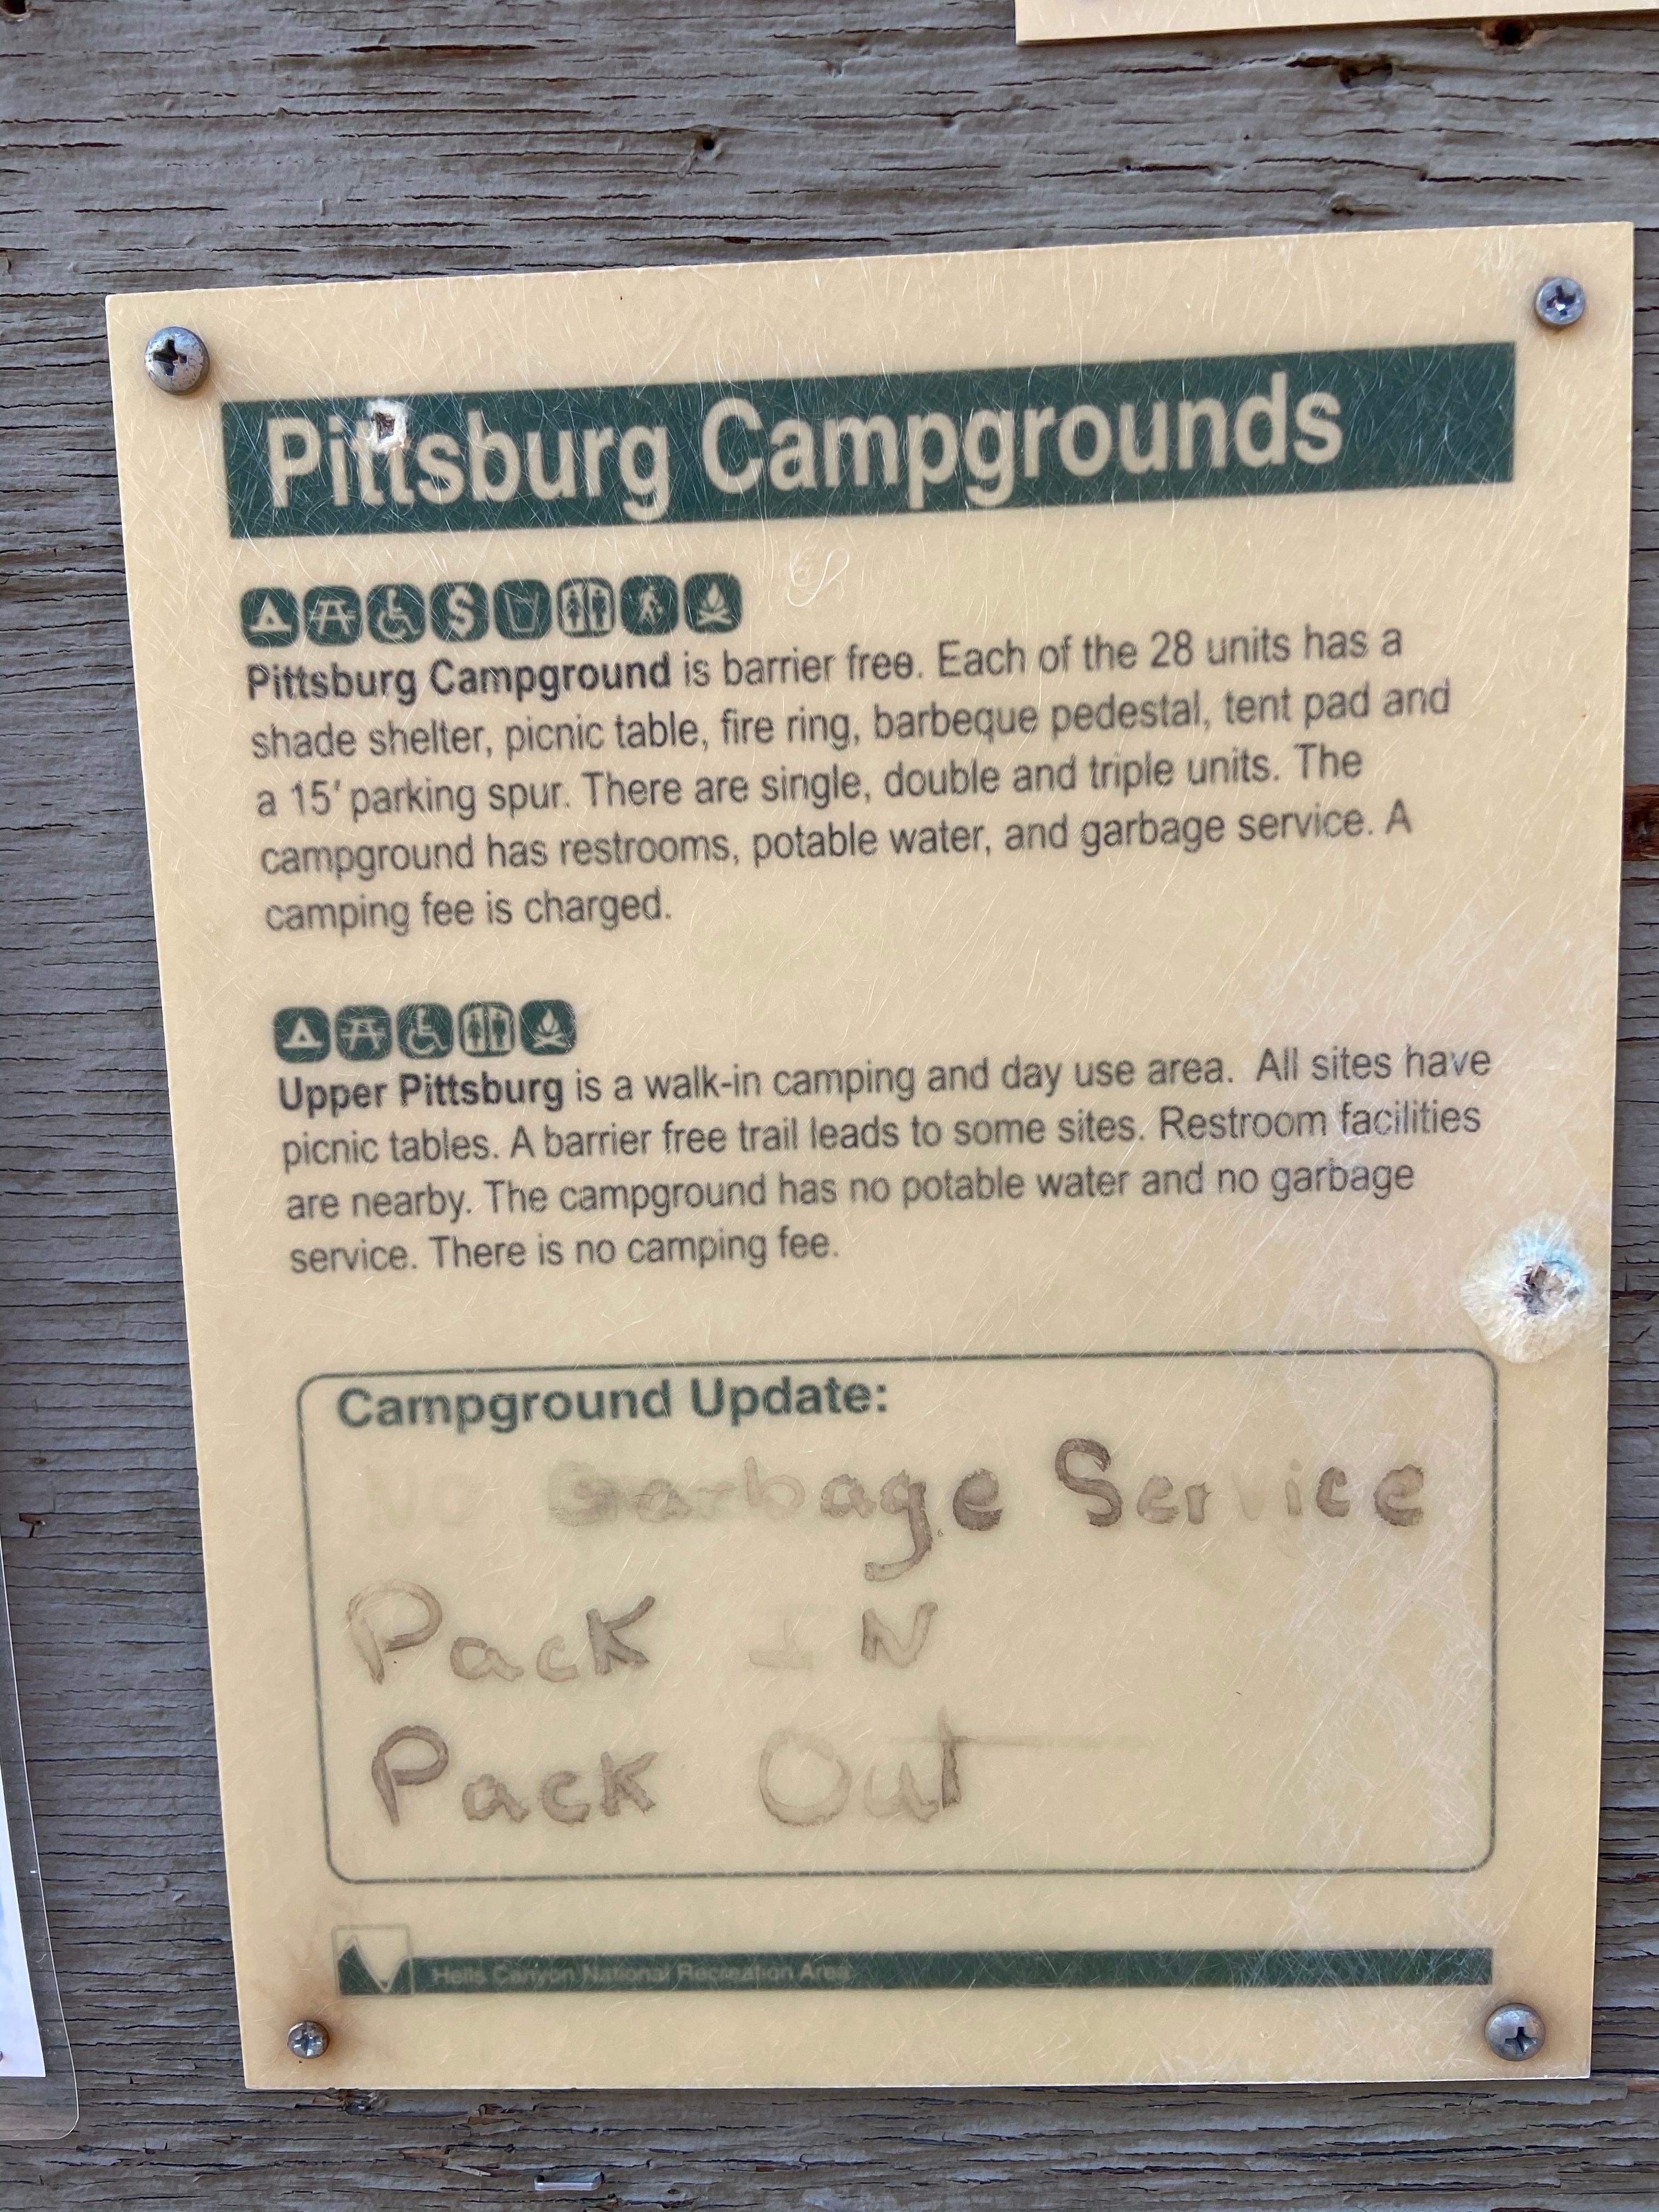 Camper submitted image from Pittsburg Campground - 4